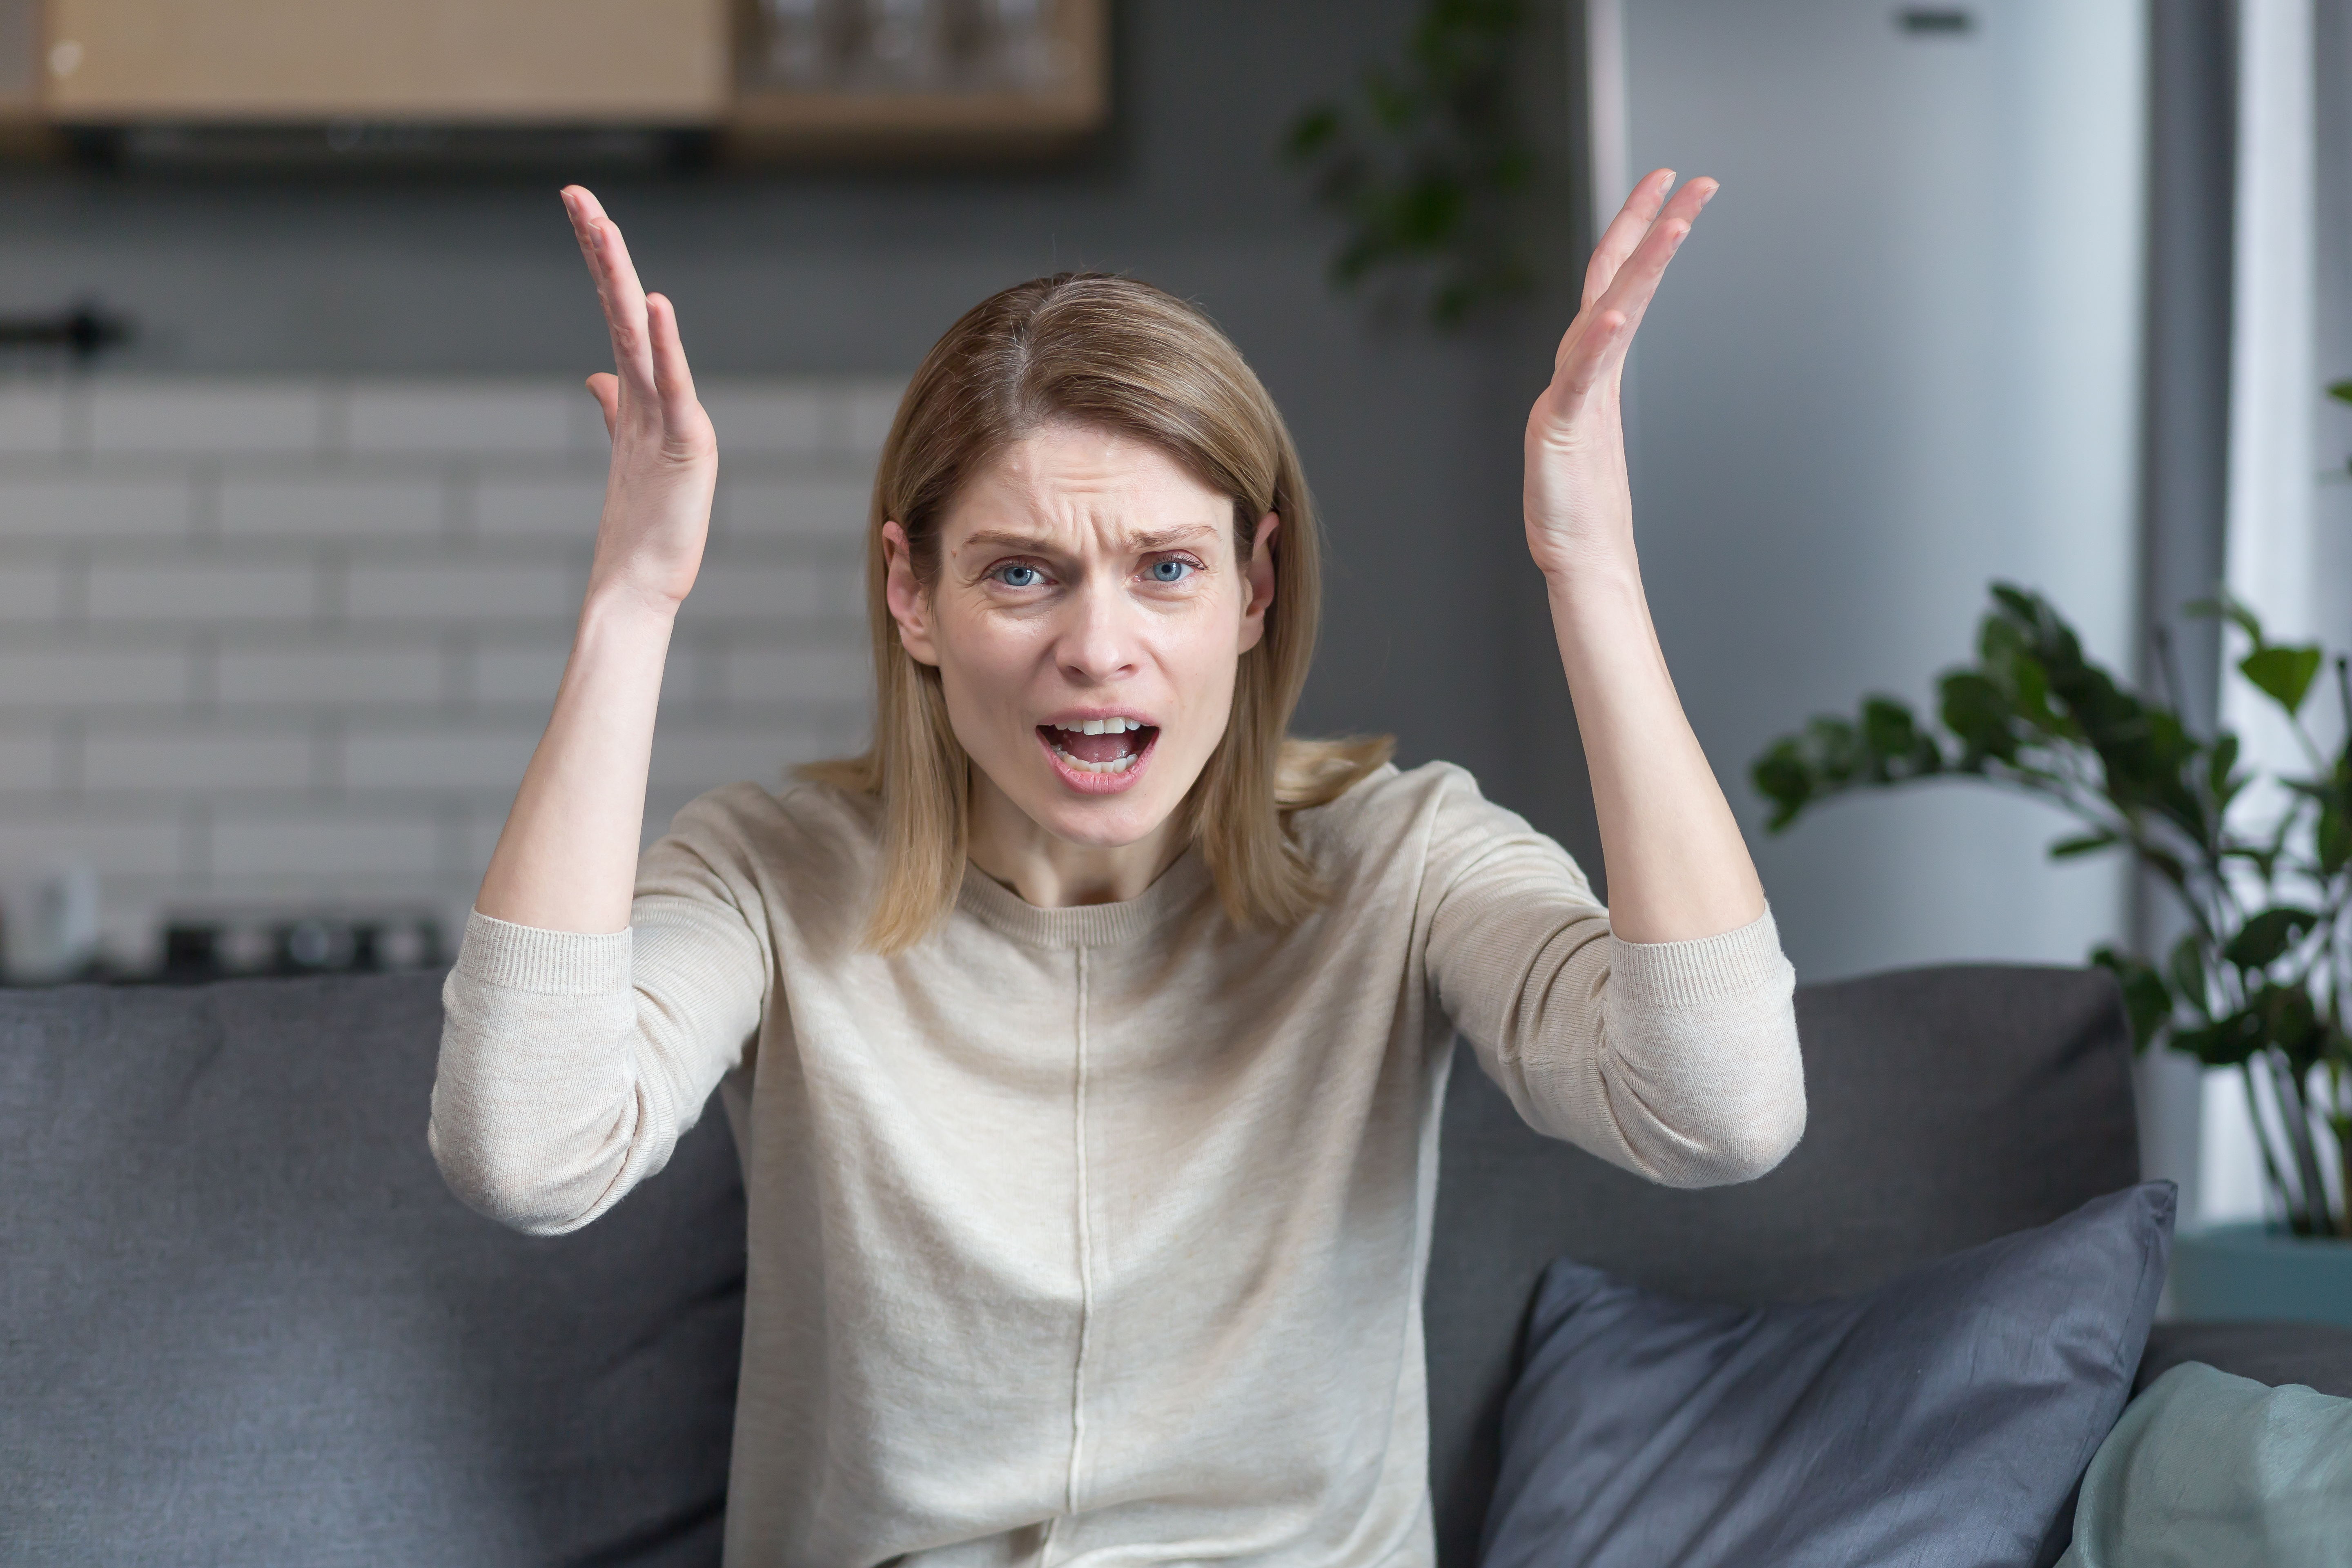 Angry and frustrated woman talking on video call looking at webcam, angrily gesturing with hands while sitting on sofa at home | Source: Getty Images